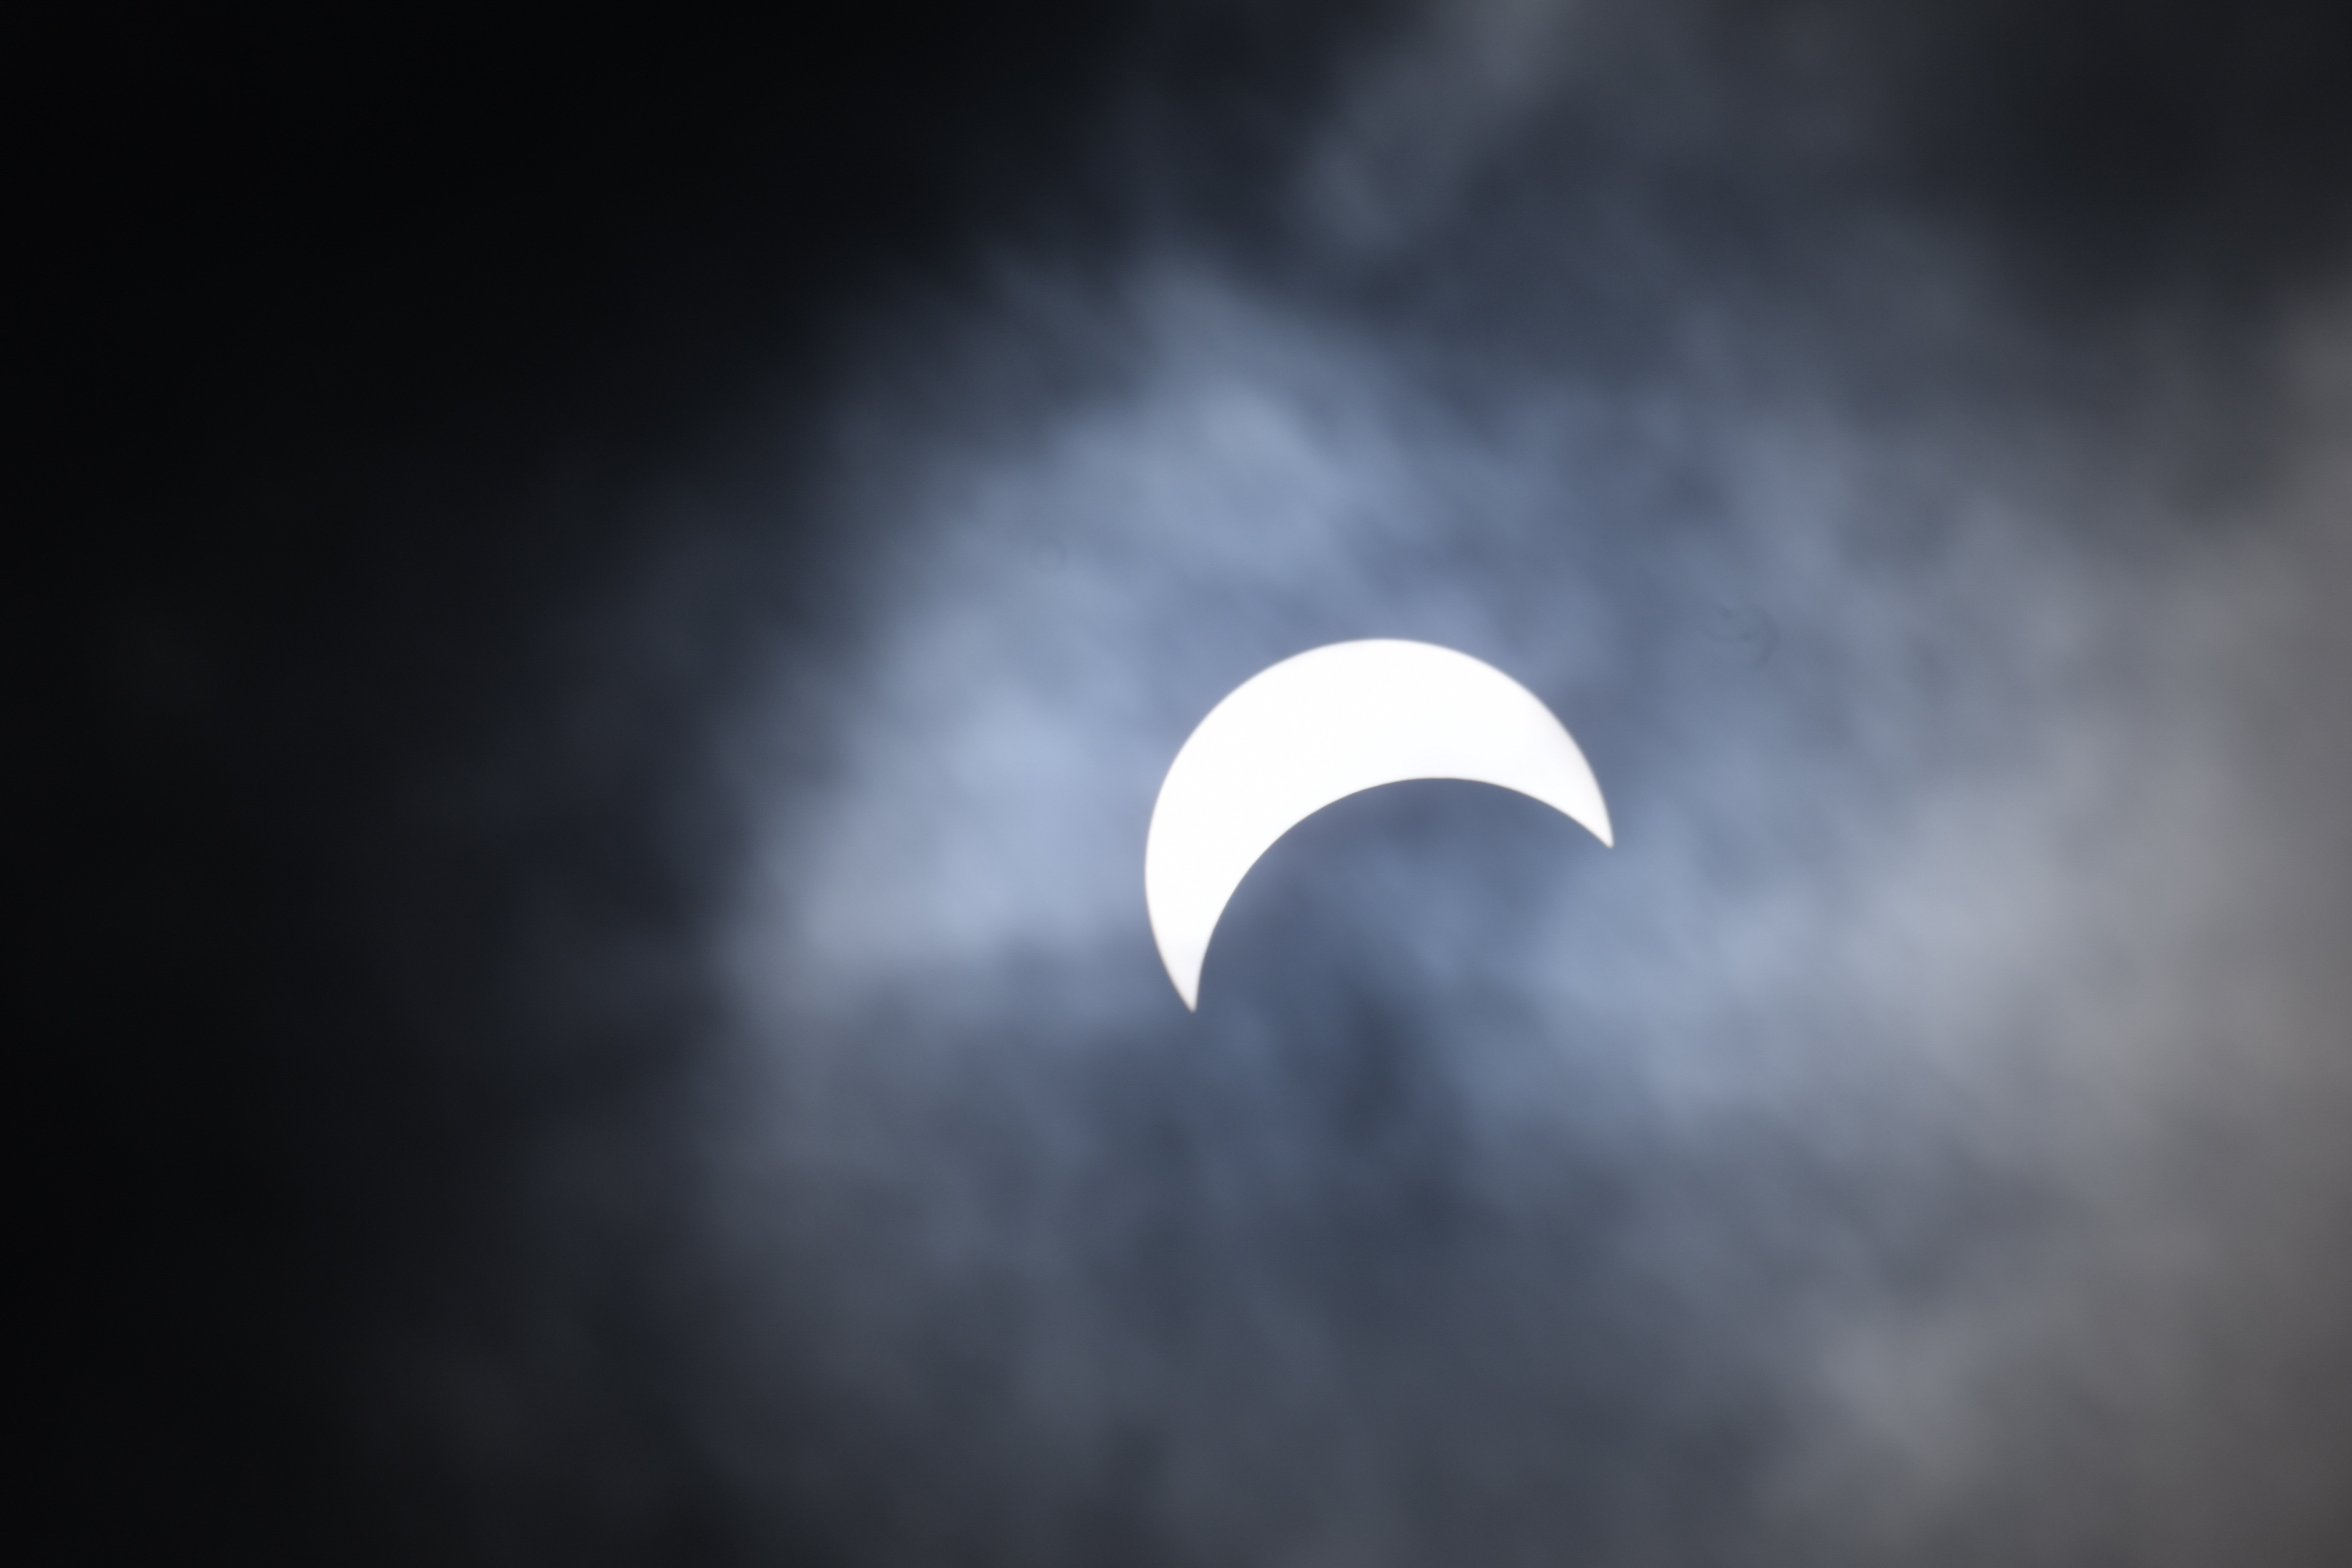 After a tense period waiting for the sky to clear, the solar eclipse broke through the clouds over Beamsville, Ontario at 2:50 pm April 8 2024. Norm Rosen photo.